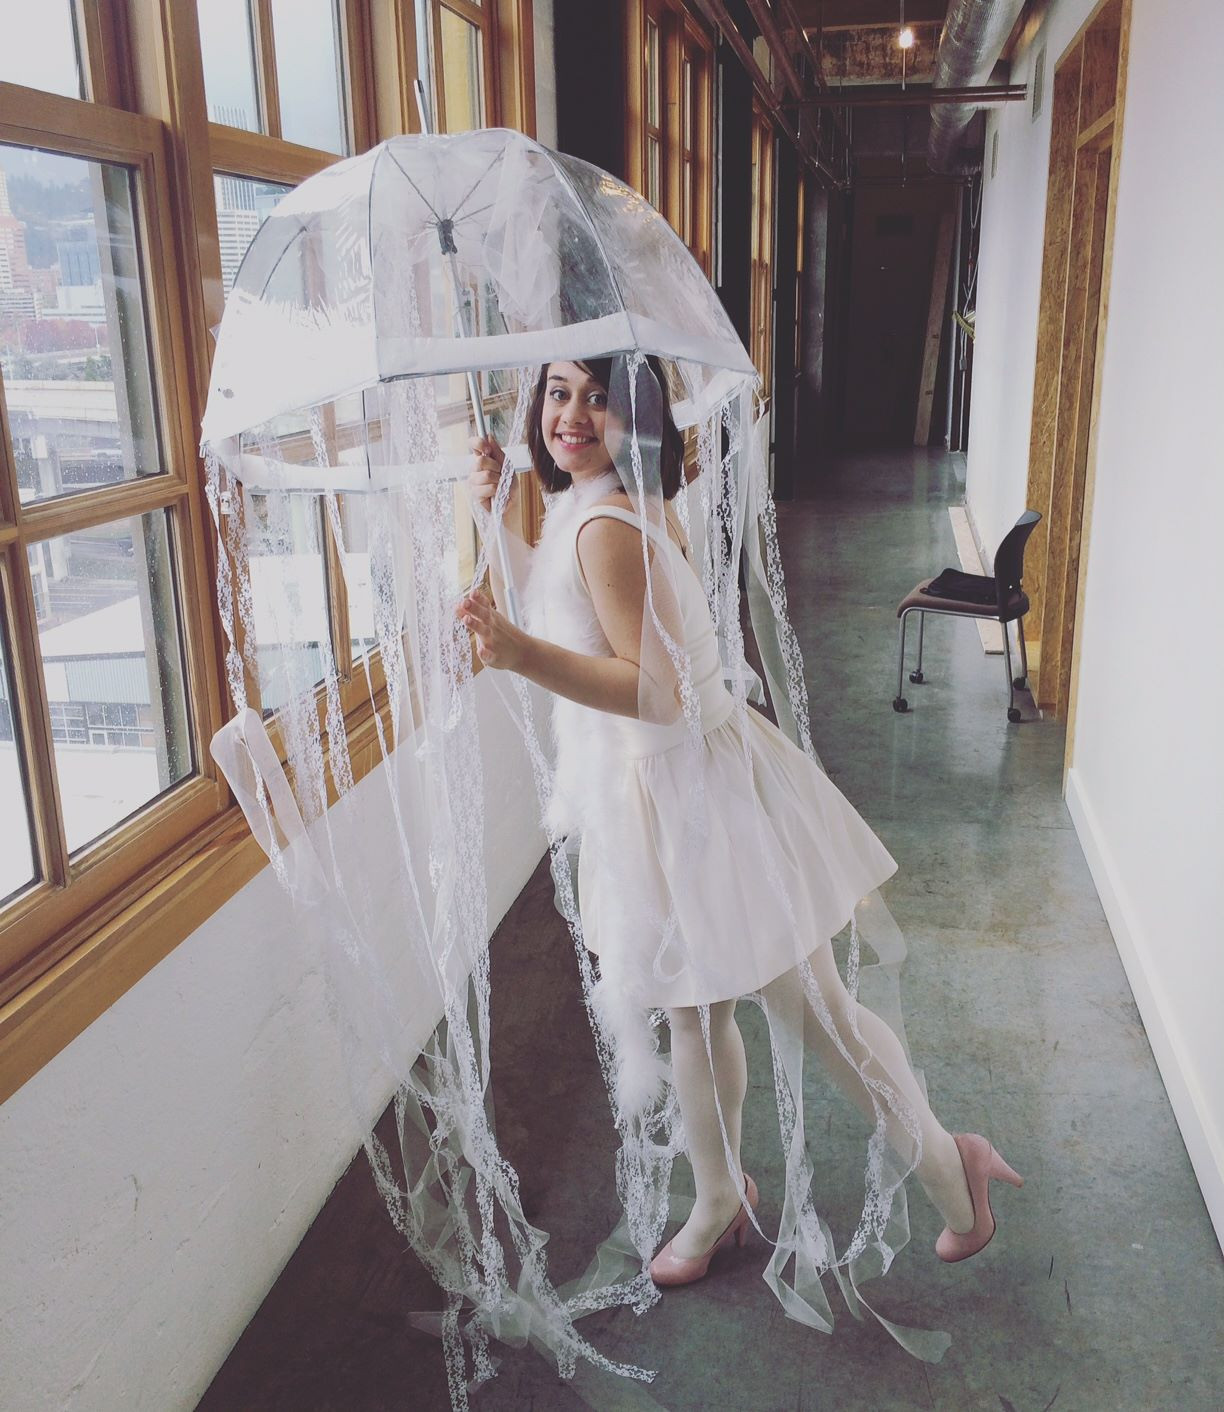 DIY Jellyfish Costume
 LINDSTYLEFILES How to Make a Jellyfish Costume in 6 Steps